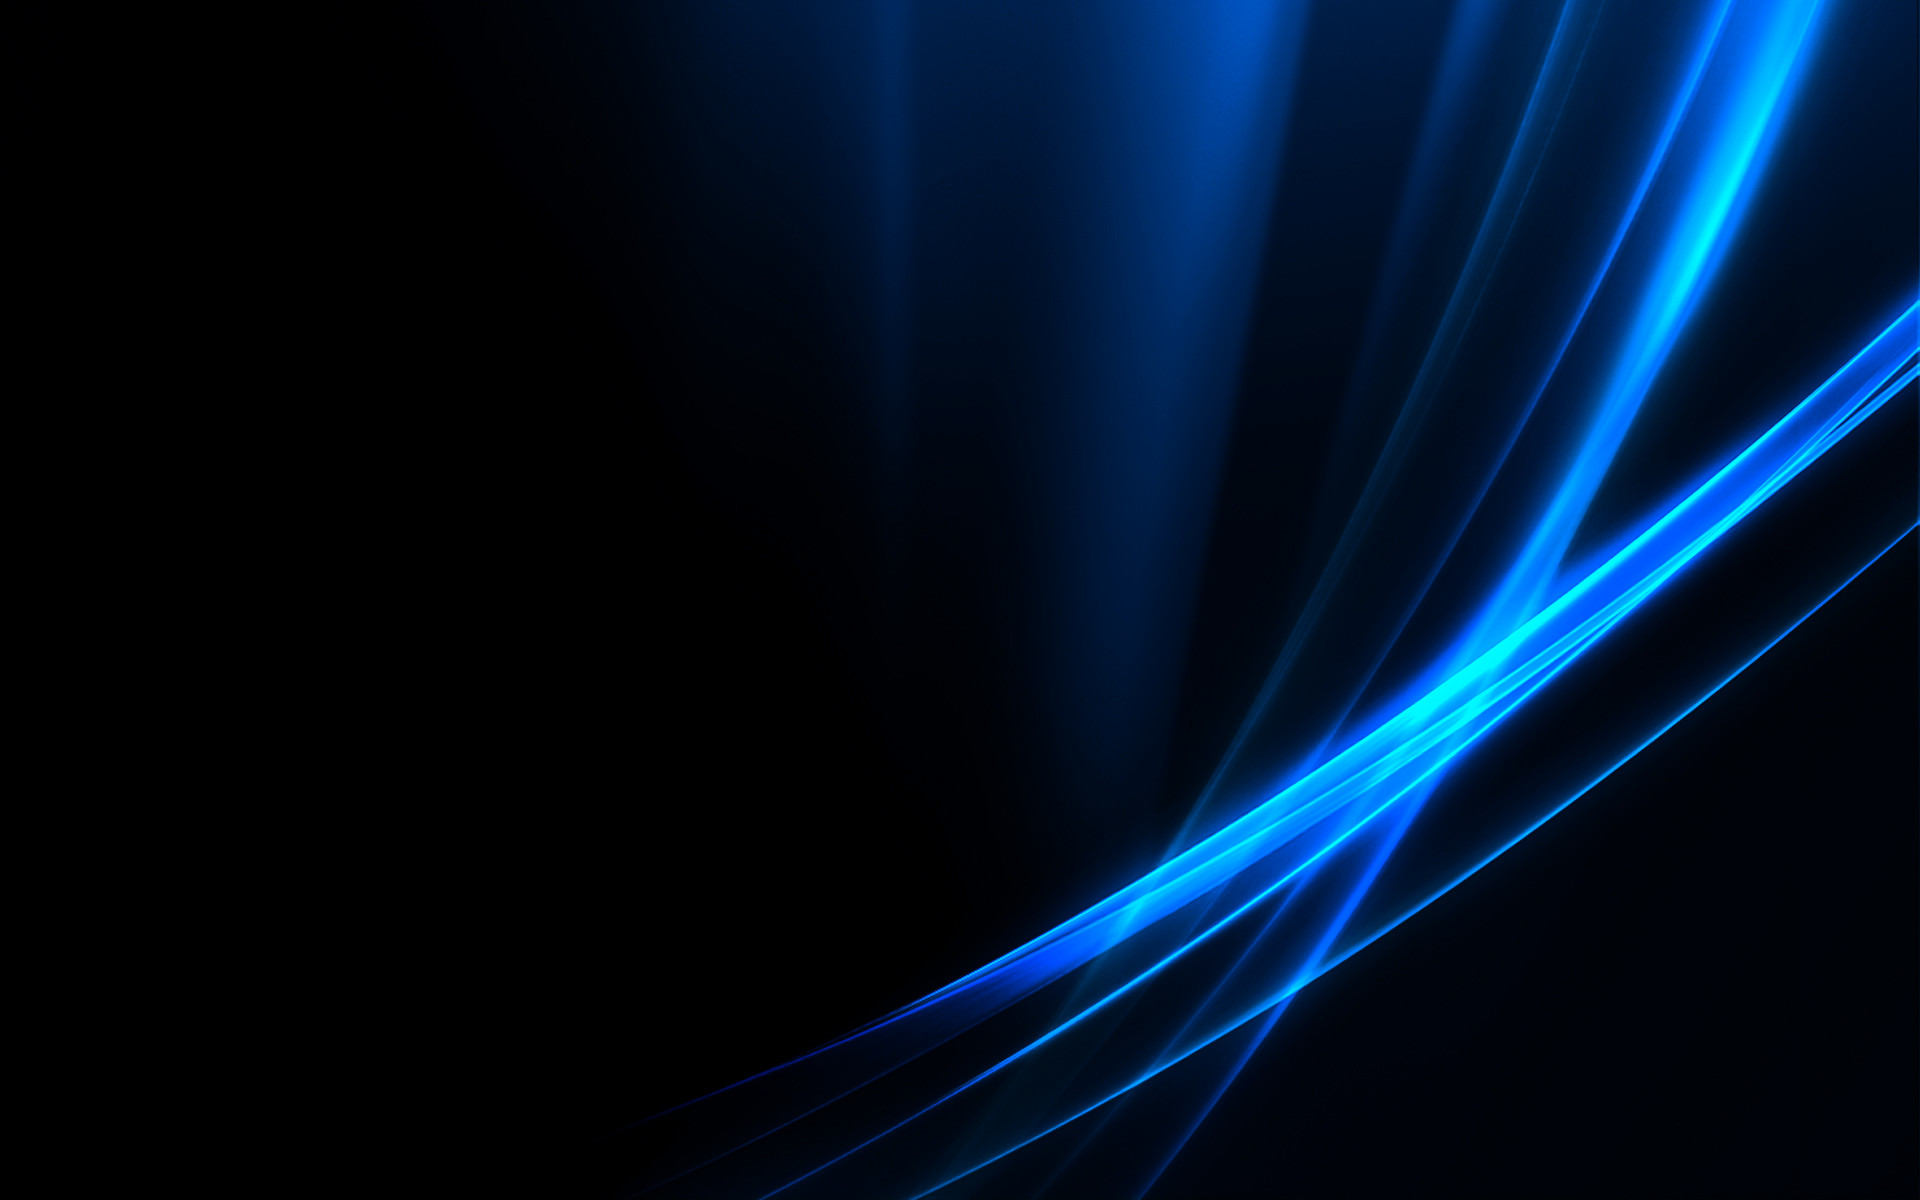 1920x1200 1920 x 1200 Wallpapers, Widescreen Wallpapers, 12277-abstract-blue.jpg